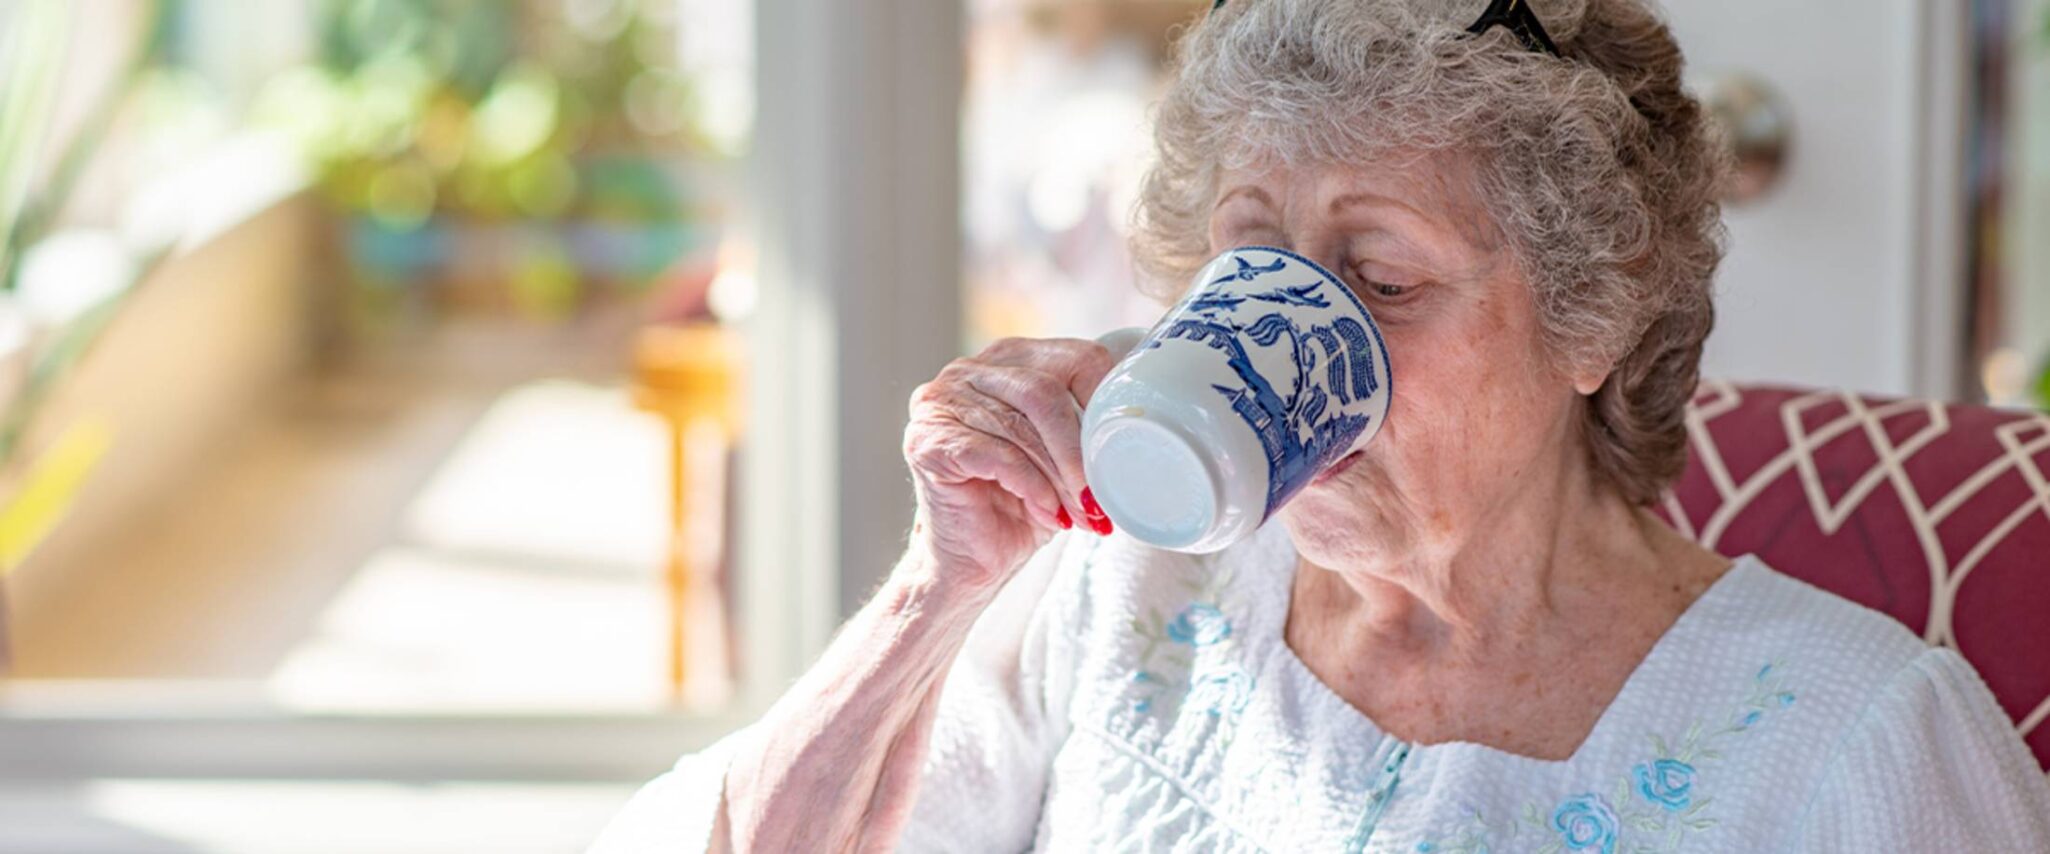 elderly woman drinking a cup of coffee in her night gown